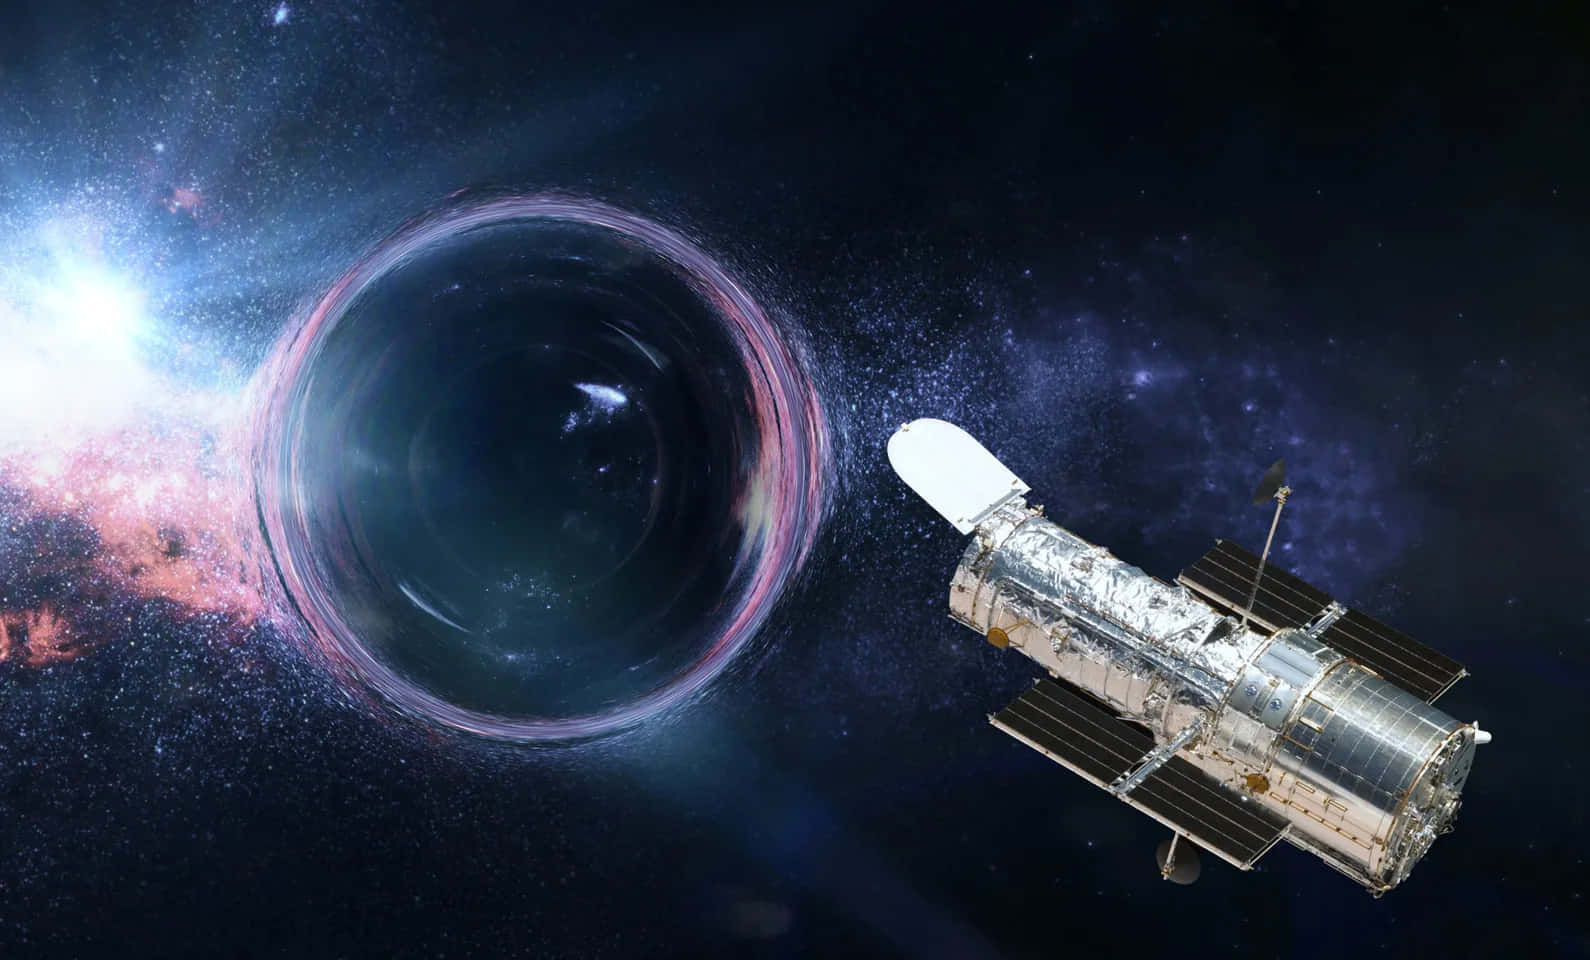 Witnessing a Rare, Distant Black Hole with the Hubble Telescope